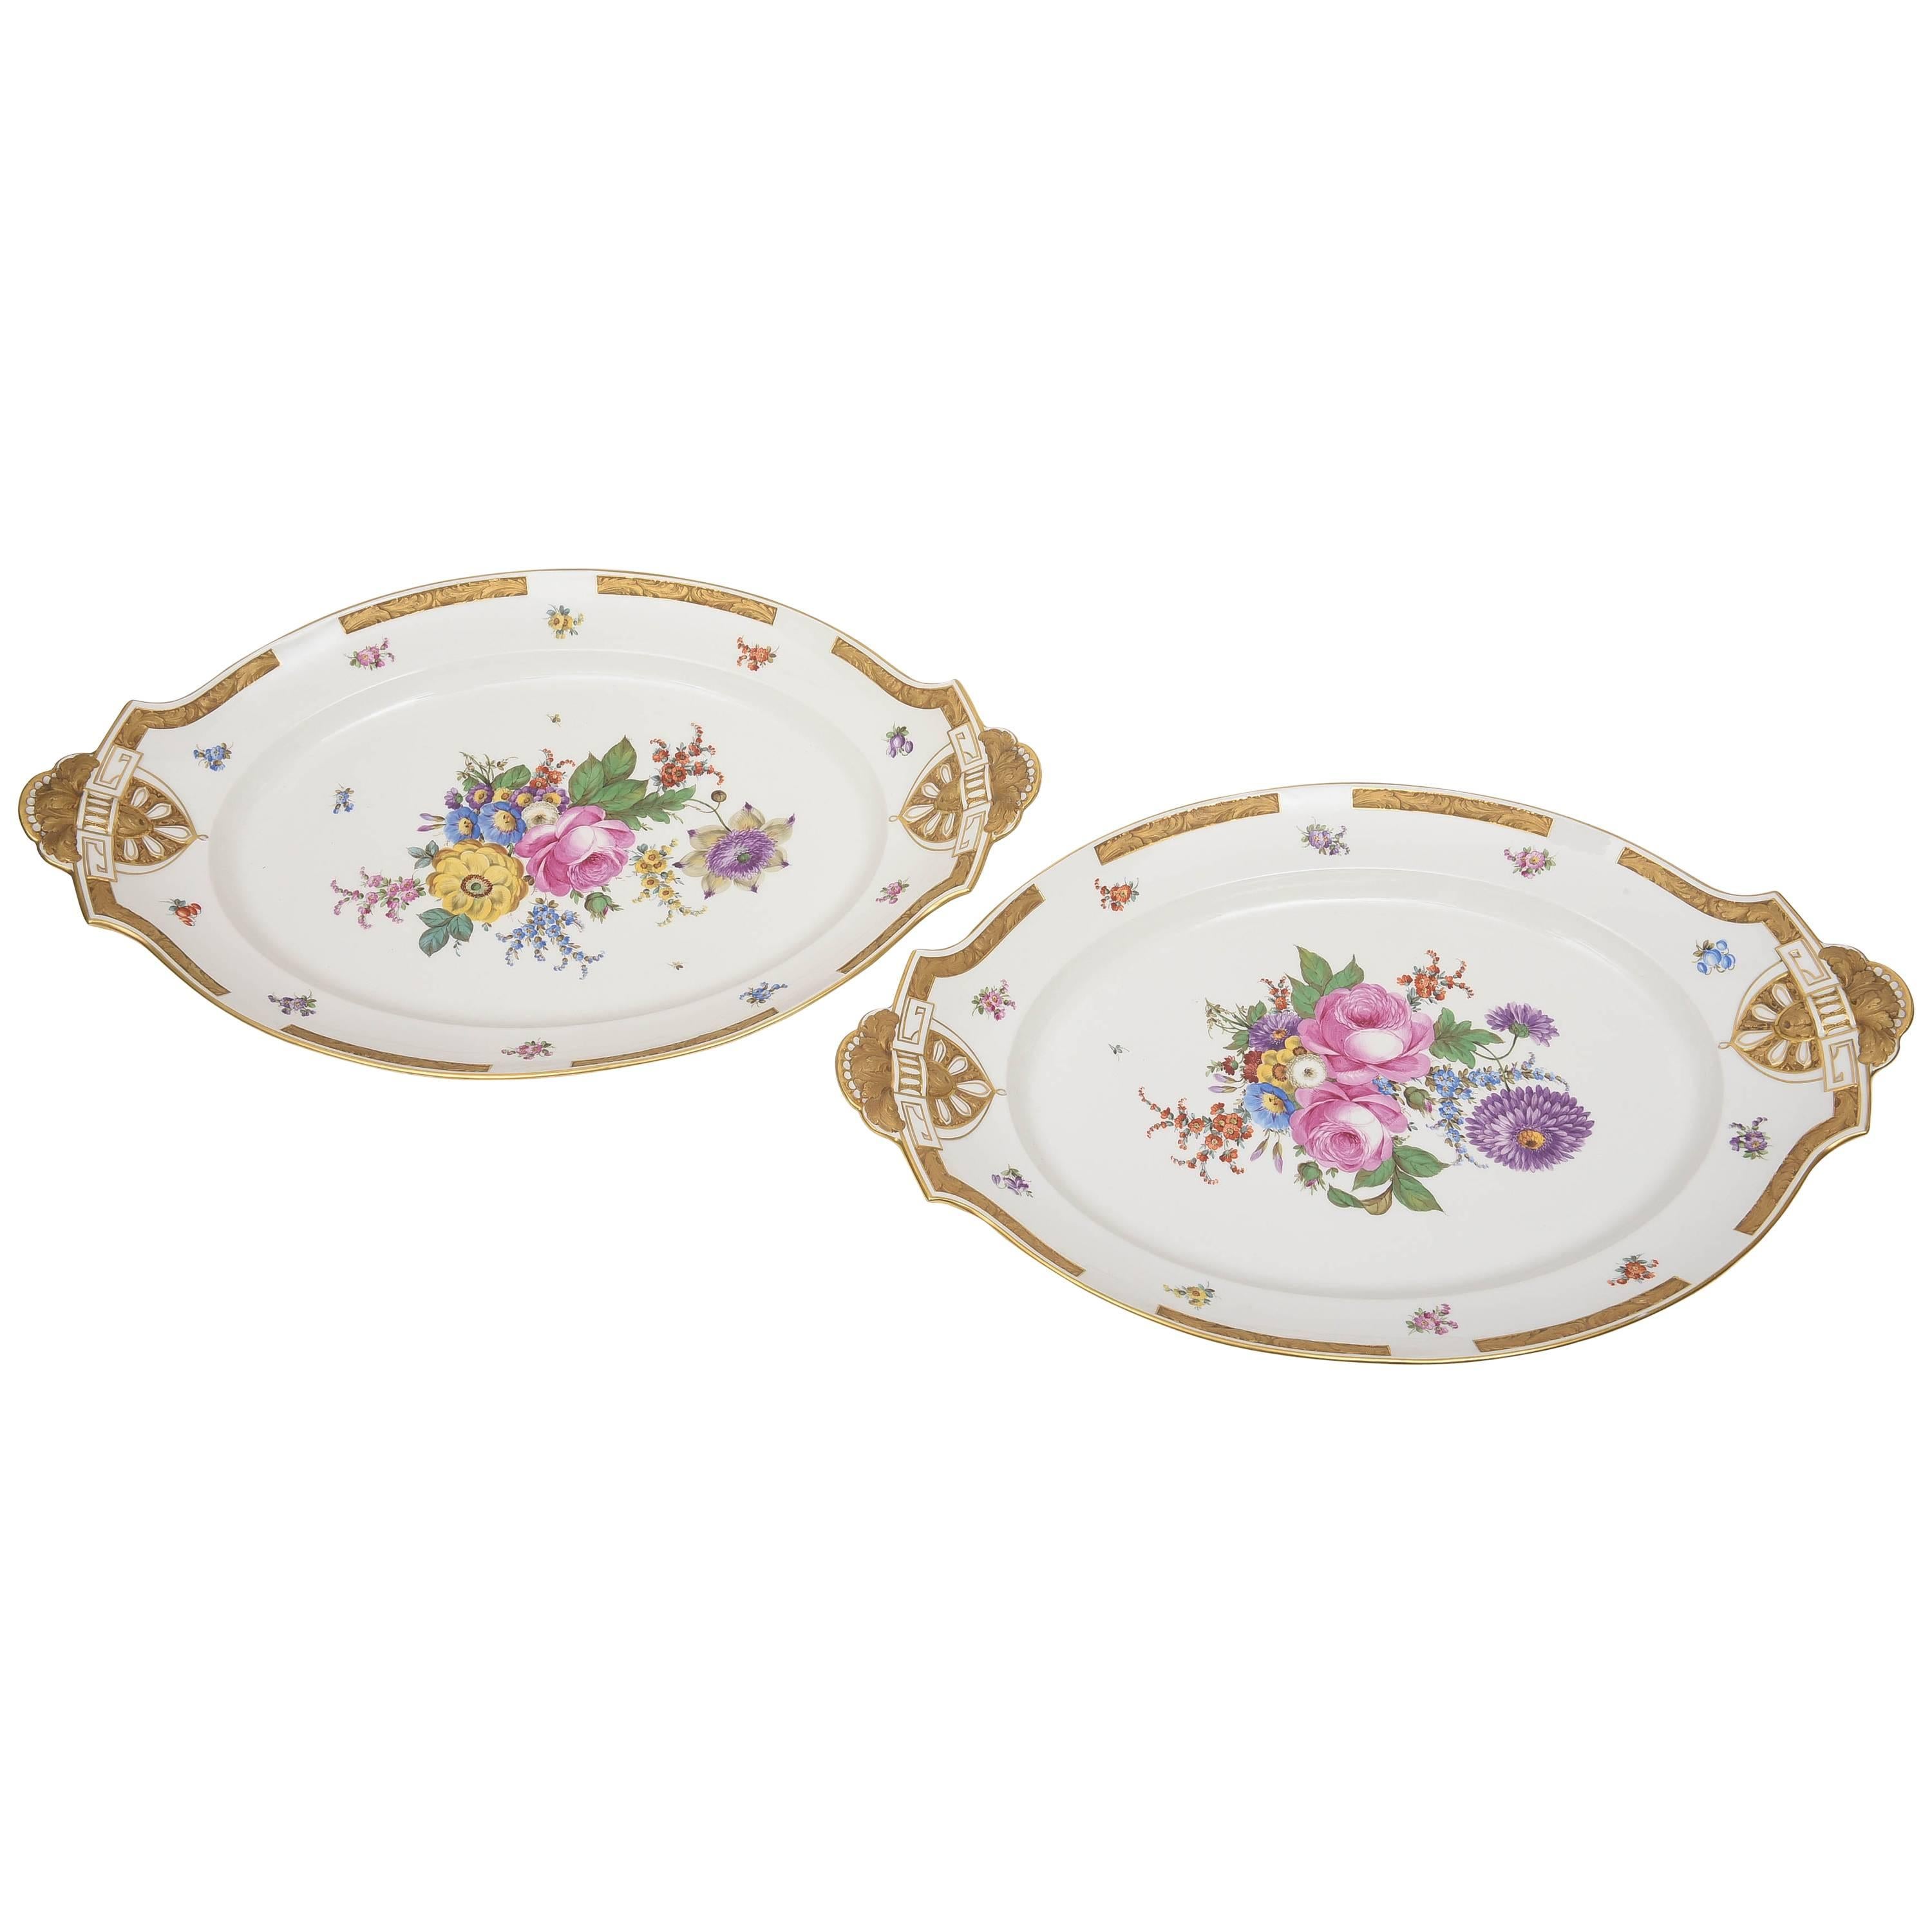 Pair of Antique Serving Platters, KPM Hand Painted and Gilt Encrusted